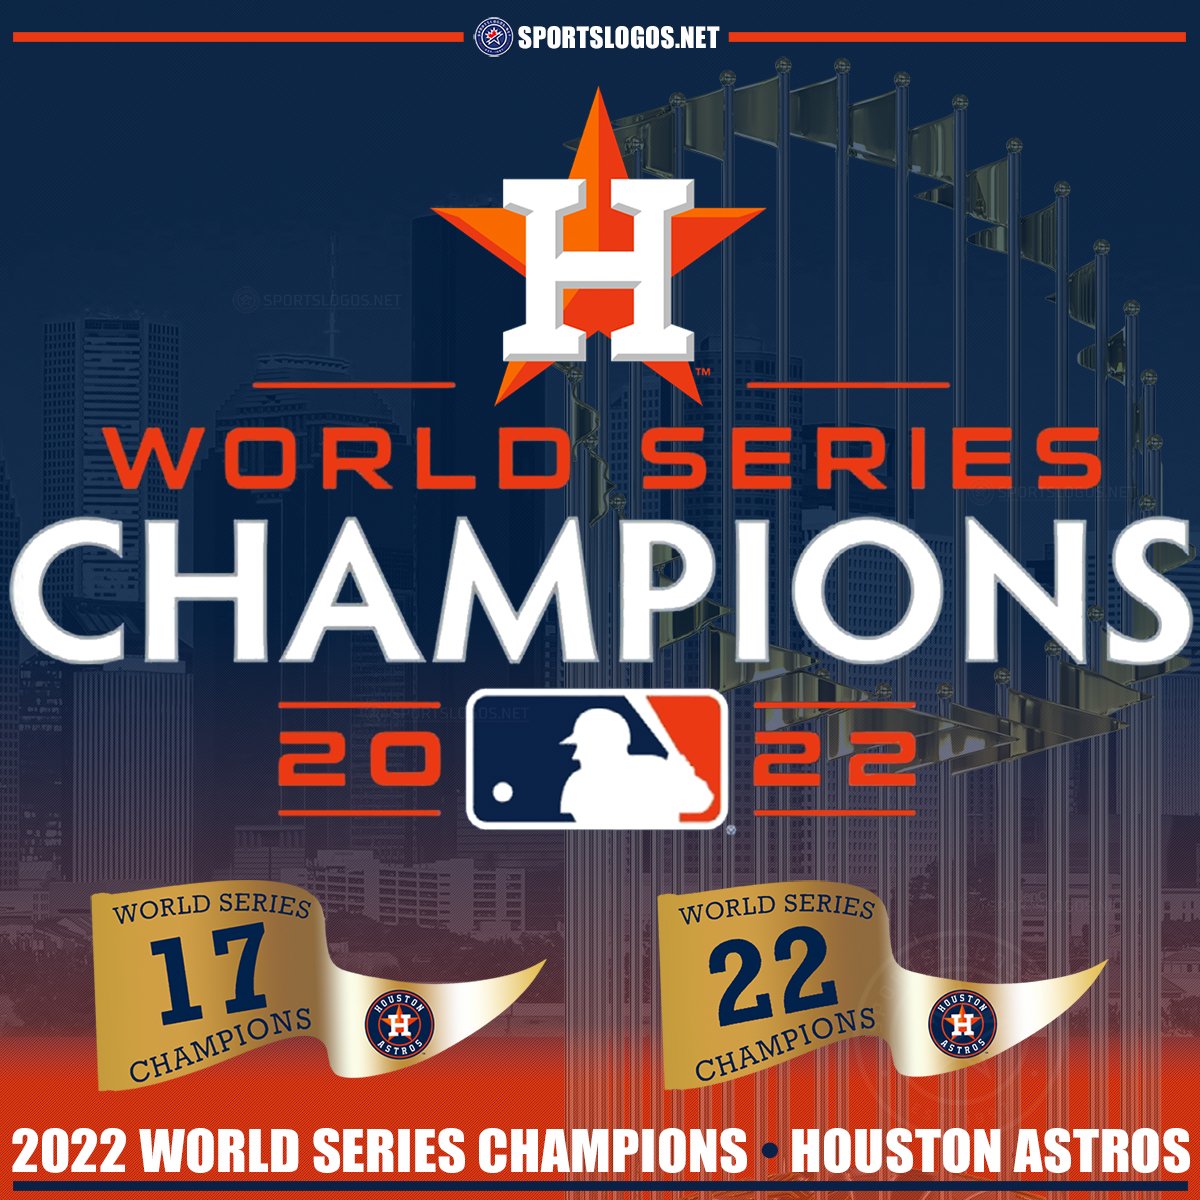 Chris Creamer  SportsLogos.Net on X: The @Astros have worn patches over  the years marking their first season as a franchise in 1962 and also as  their first as the Astros in